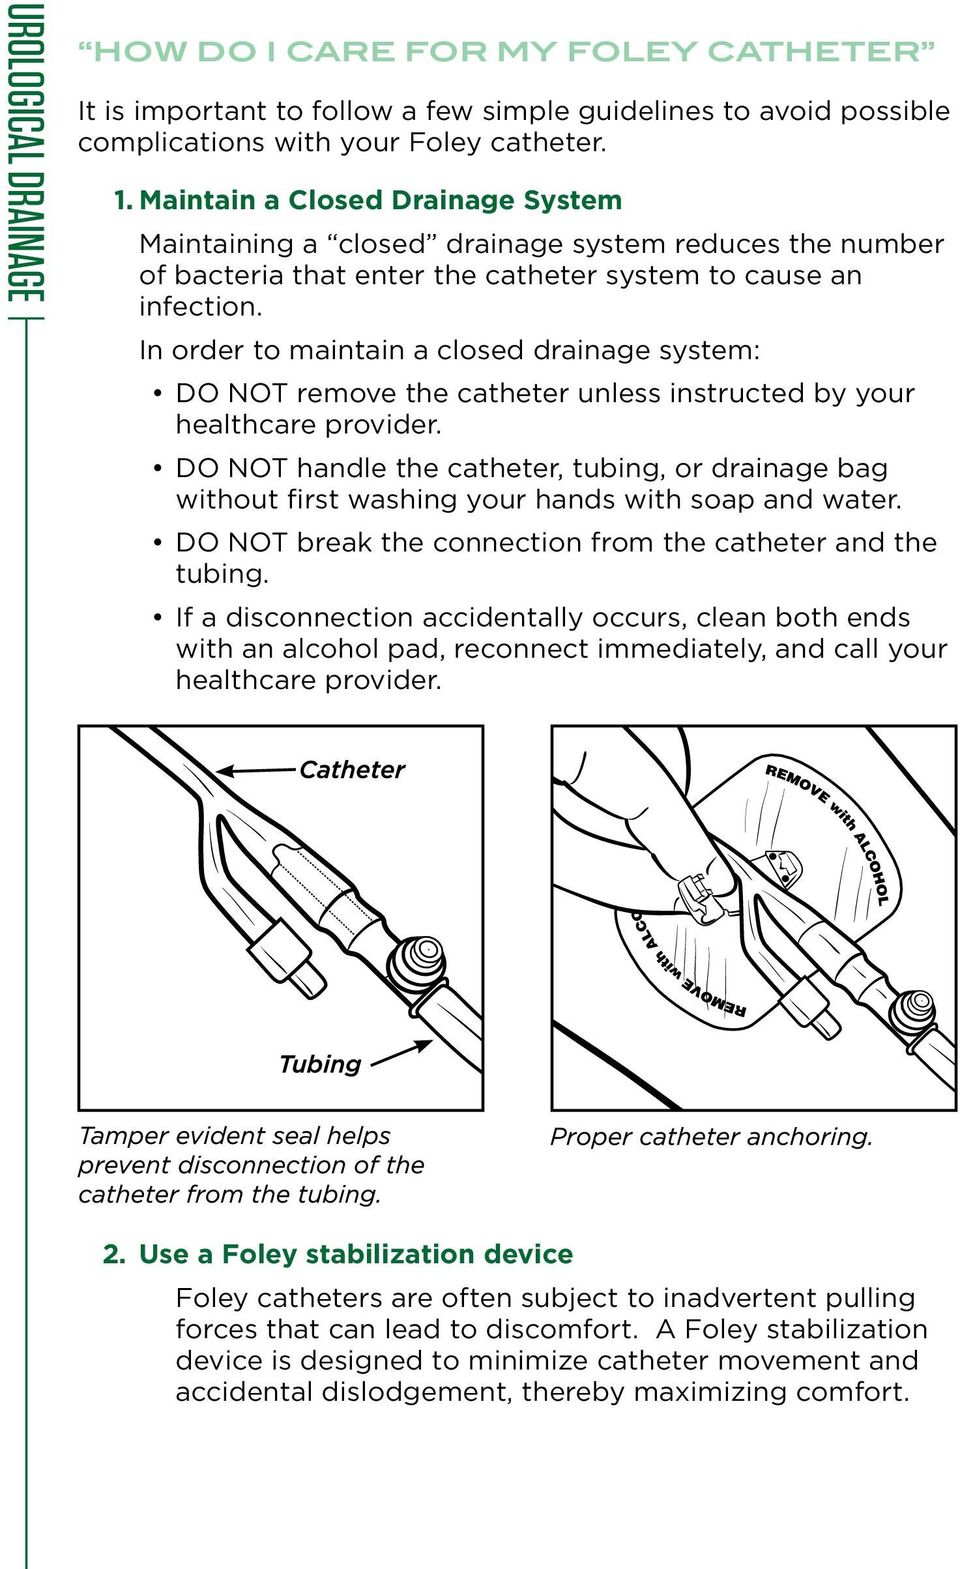 In order to maintain a closed drainage system: DO NOT remove the catheter unless instructed by your healthcare provider.